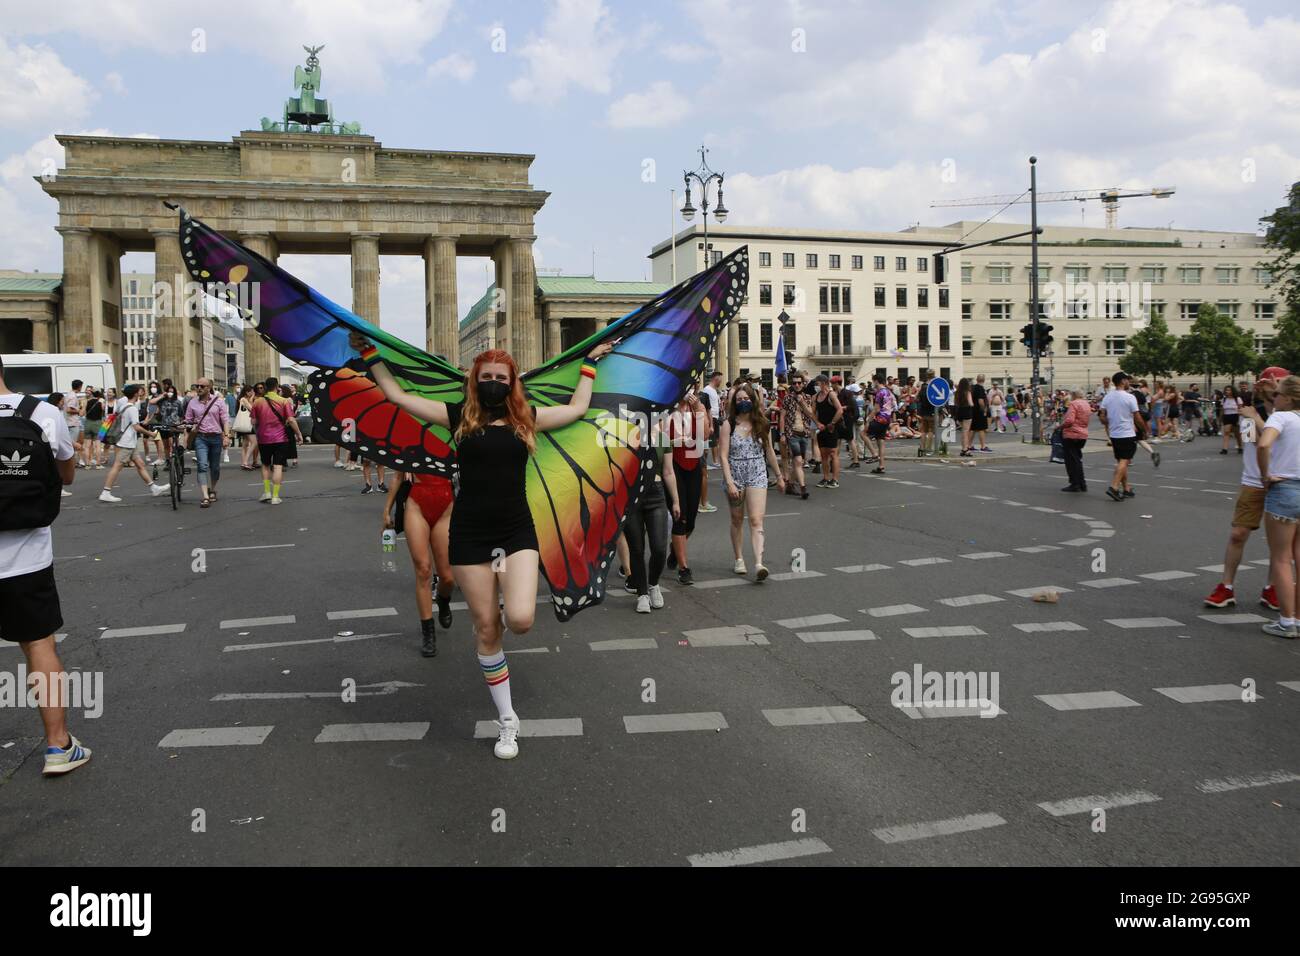 07/24/2021, Berlin, Germany. Participants at the CSD Berlin 2021.. Thousands of people move through Europe's 'rainbow capital' Berlin. At the CSD Parade in Berlin, people take to the streets for the rights of gays, lesbians, transsexuals and transgender people, inter- and bisexuals. The motto for 2021 is “Save our Community - Save your Pride!”. Stock Photo